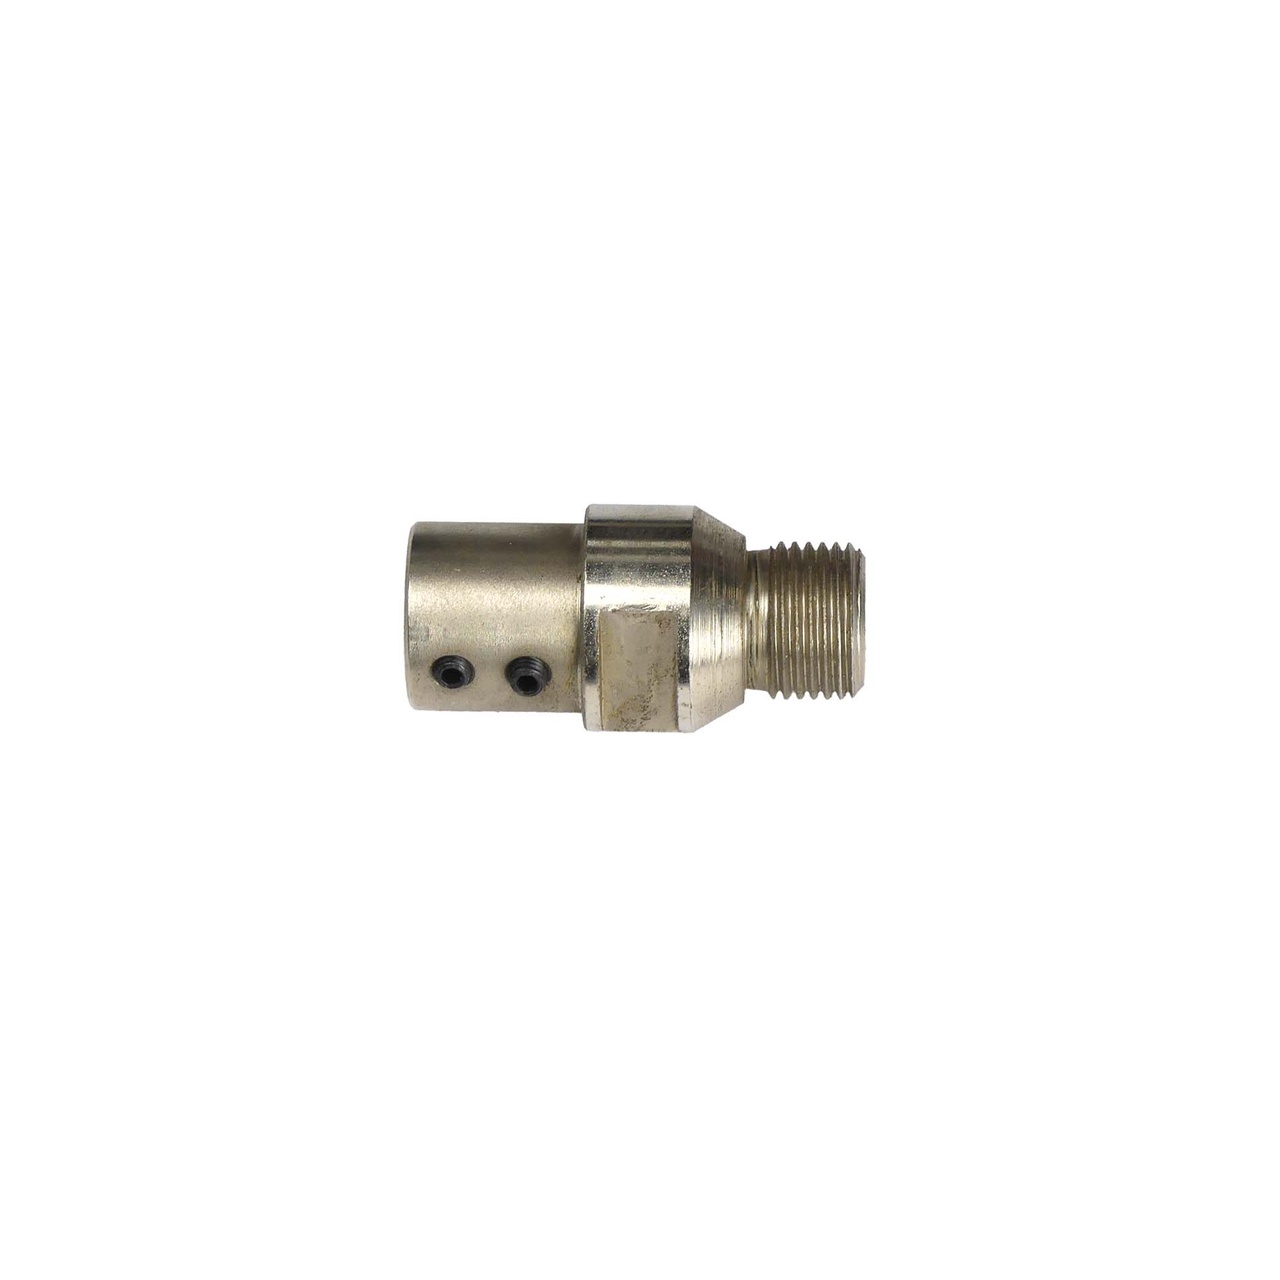 Adapter 1/2" - 15mm Cyl